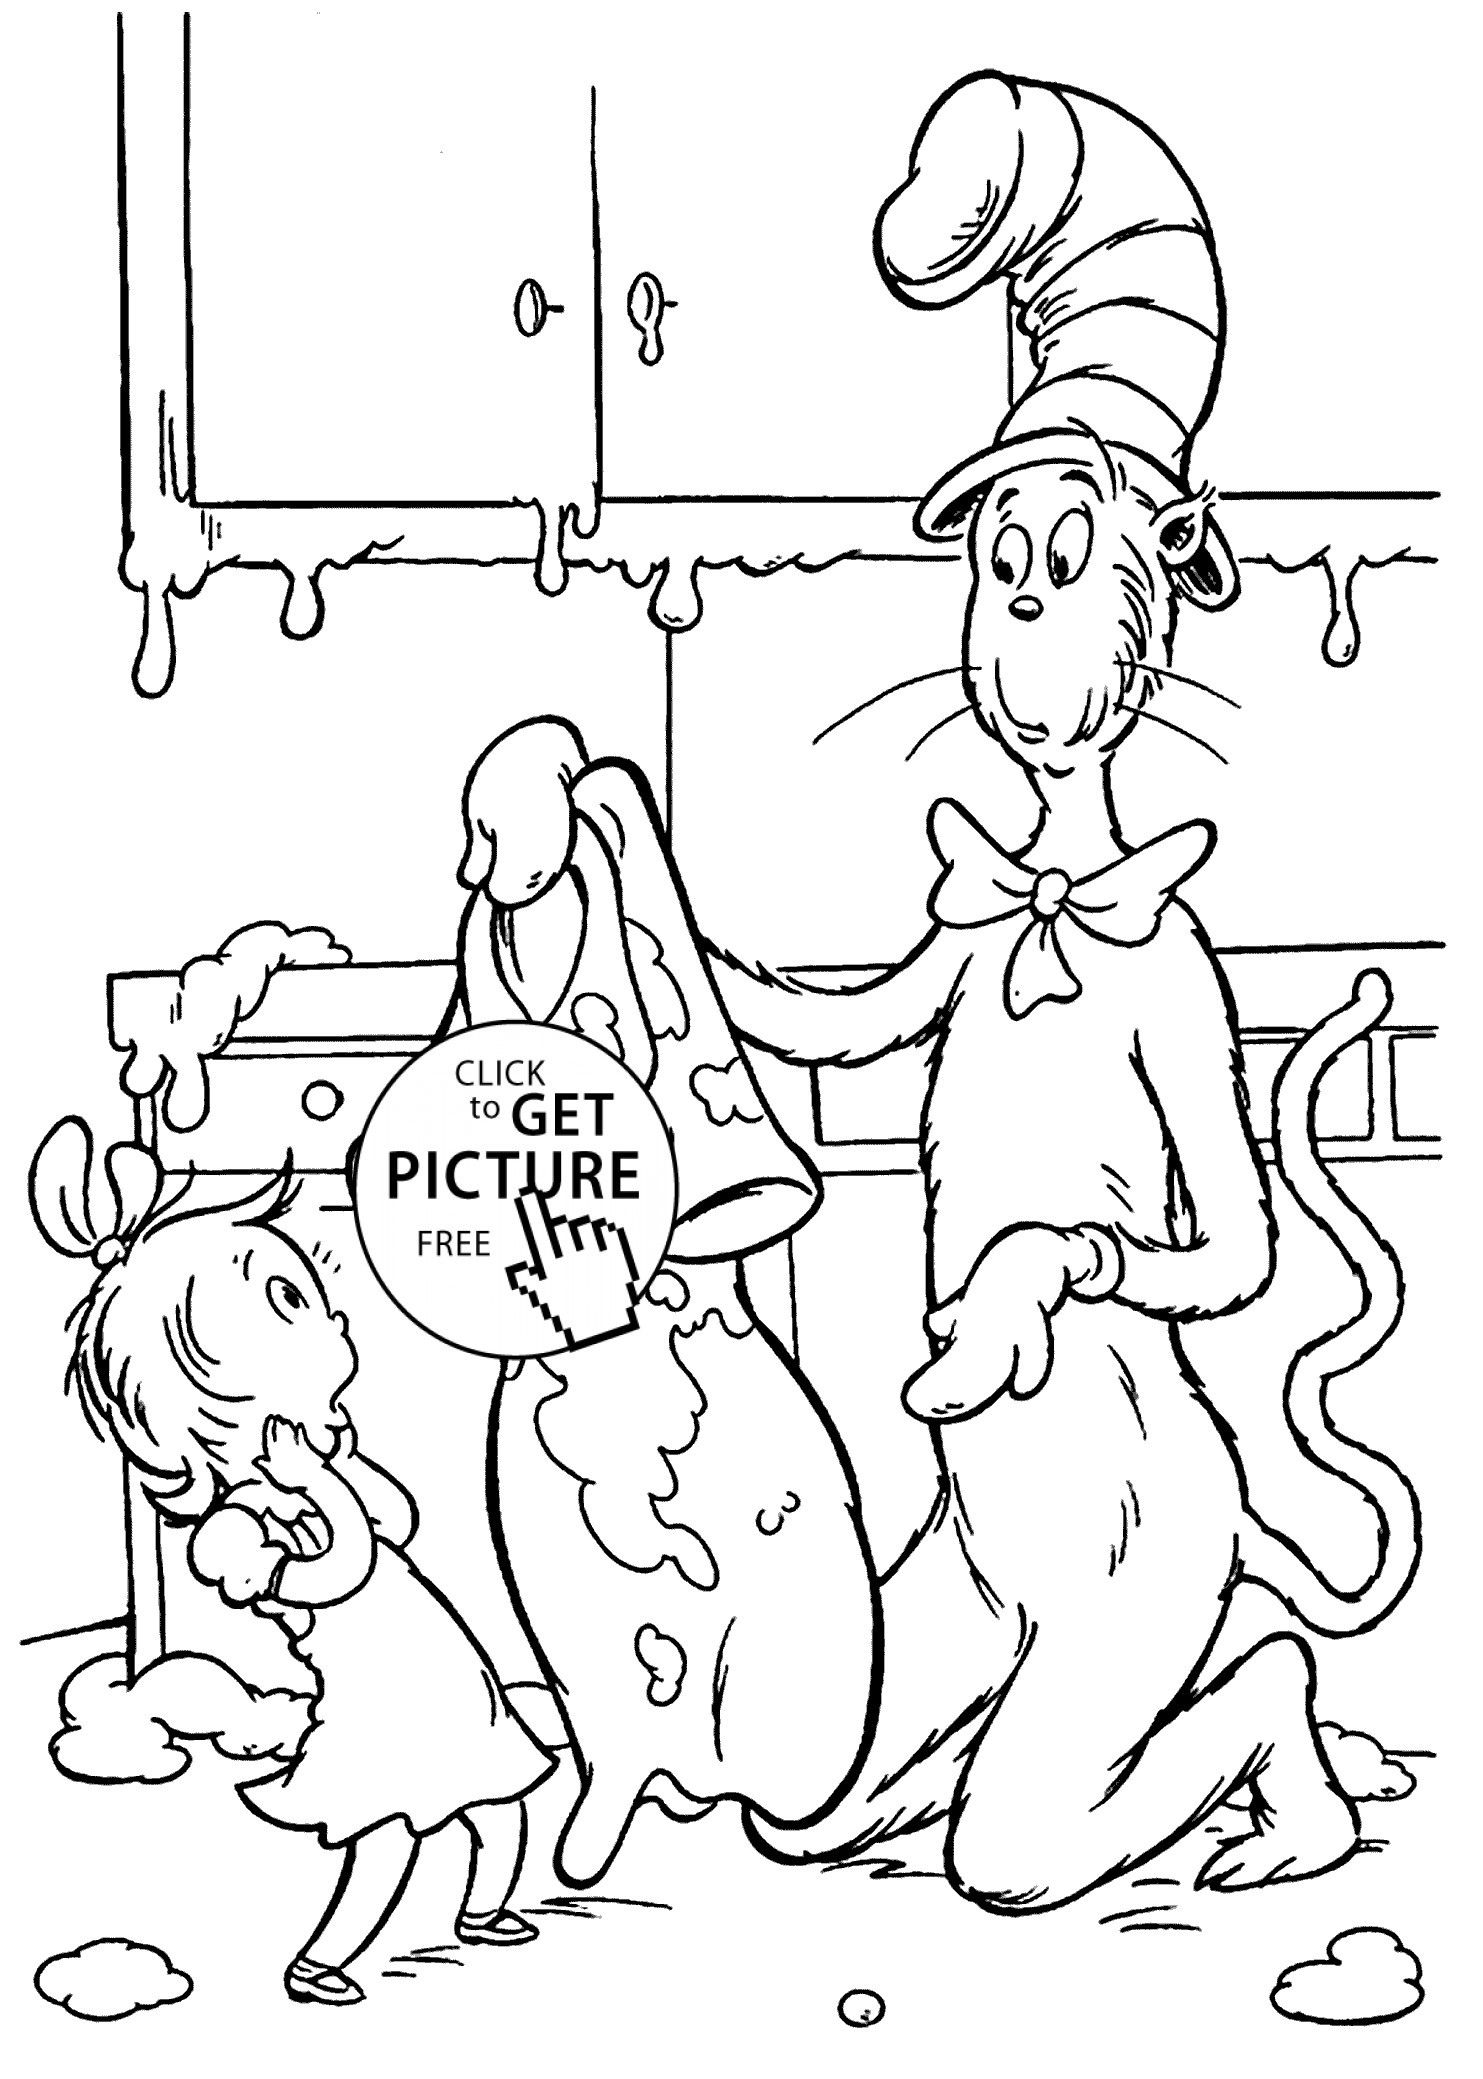 Dr Seuss Coloring Pages Save Fancy Dr Seuss Coloring Page 46 with Additional Coloring for Kids